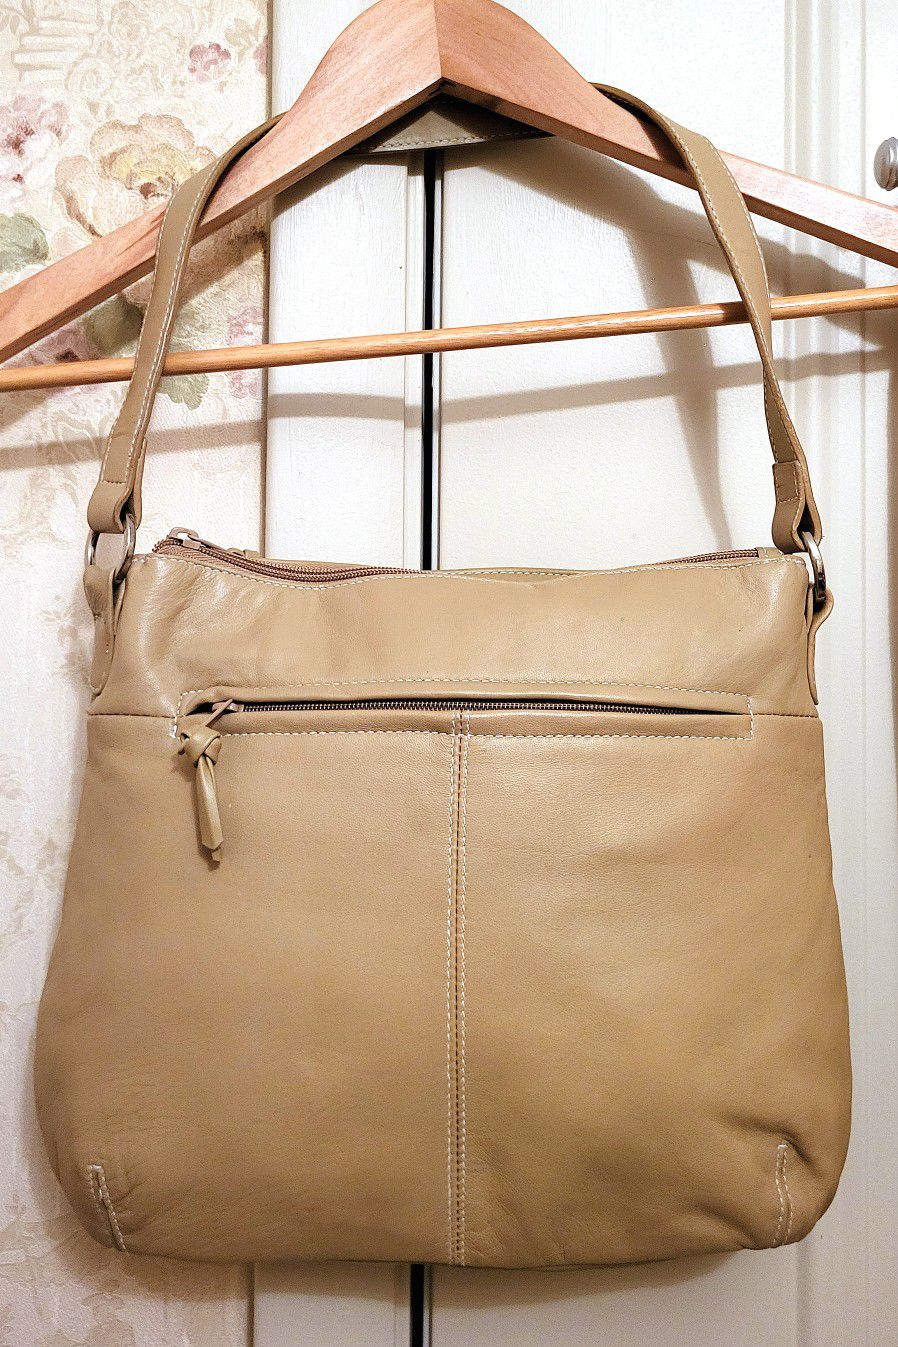 "Unknown Brand" Light Tan Very Soft Leather Shoulder Bag